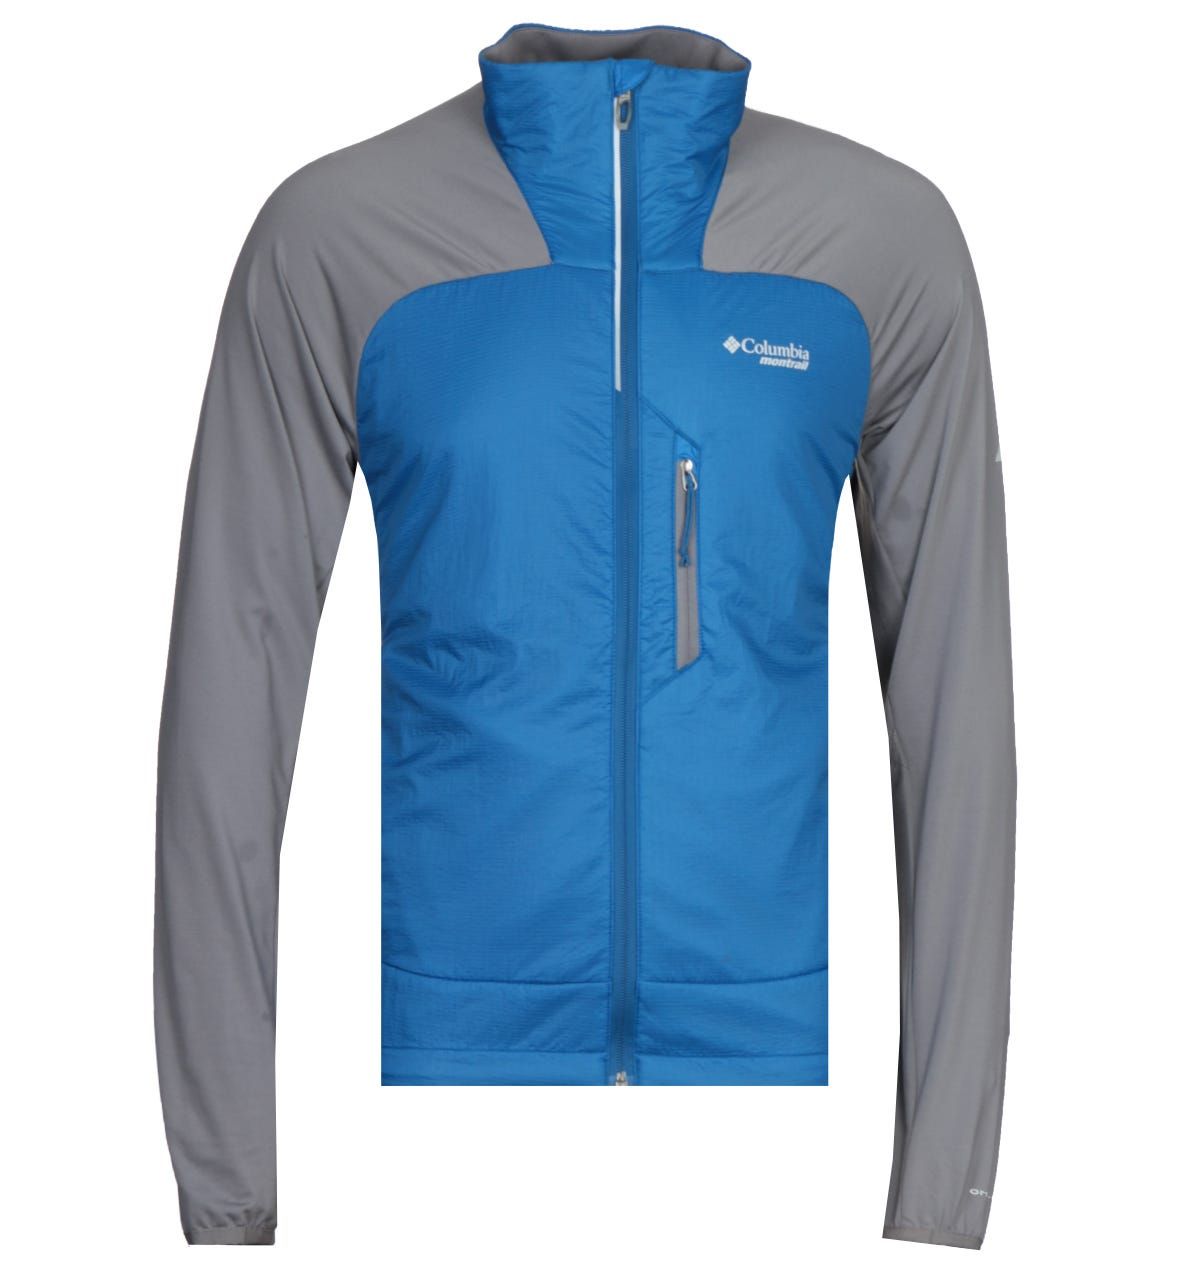 <p>A Columbia essential perfect for this seasons wardrobe. The Columbia Blue Caldorado Insulated Jacket is a lightweight polyester composition, fitted with a full zip fastening with side-entry pockets either side. The design is finished with the Columbia logo embroidered on the chest.</p><ul><li>Polyester composition</li><li>Zip fastening</li><li>Tonal stitching throughout</li><li>Columbia logo located on chest</li></ul><p>Style & Fit:</p><ul><li>Regular fit</li><li>Fits true to size</li></ul><p>Fabric Composition & Care:</p><ul><li>100% Polyester</li><li>Machine wash</li></ul>